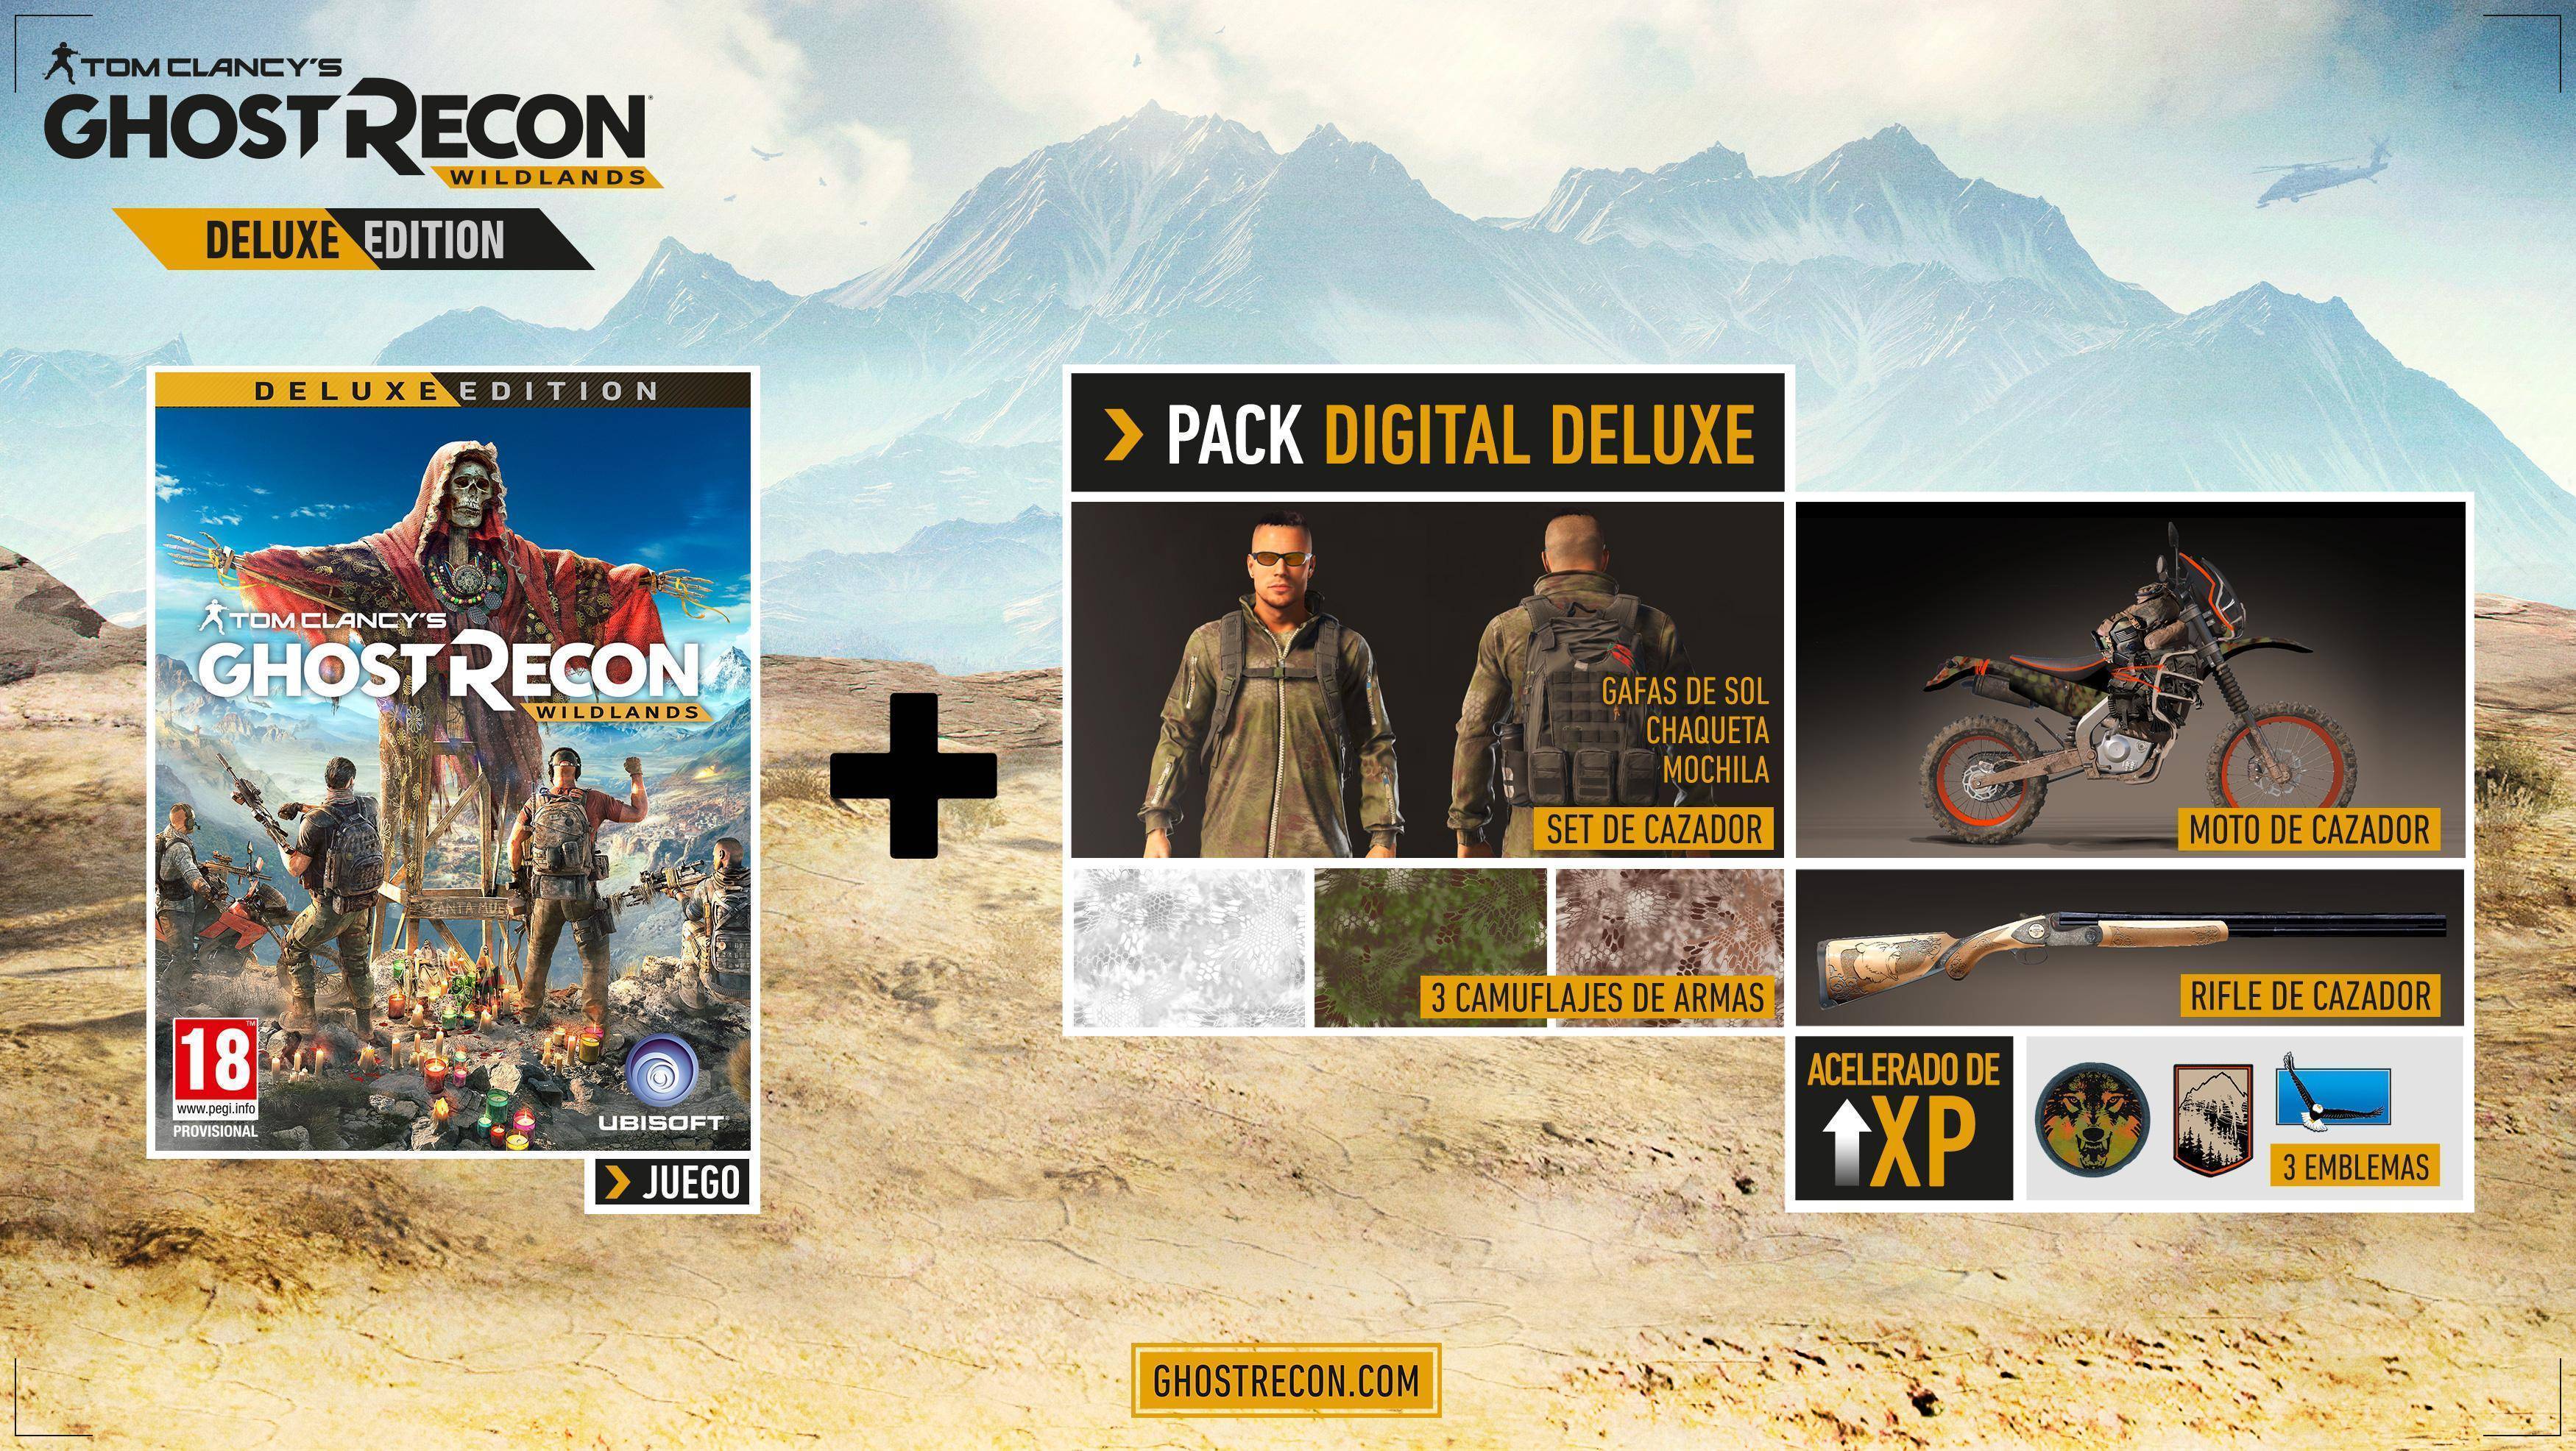 Ghost Recon Gold Edition (PC) Key cheap - Price of $22.71 for Uplay